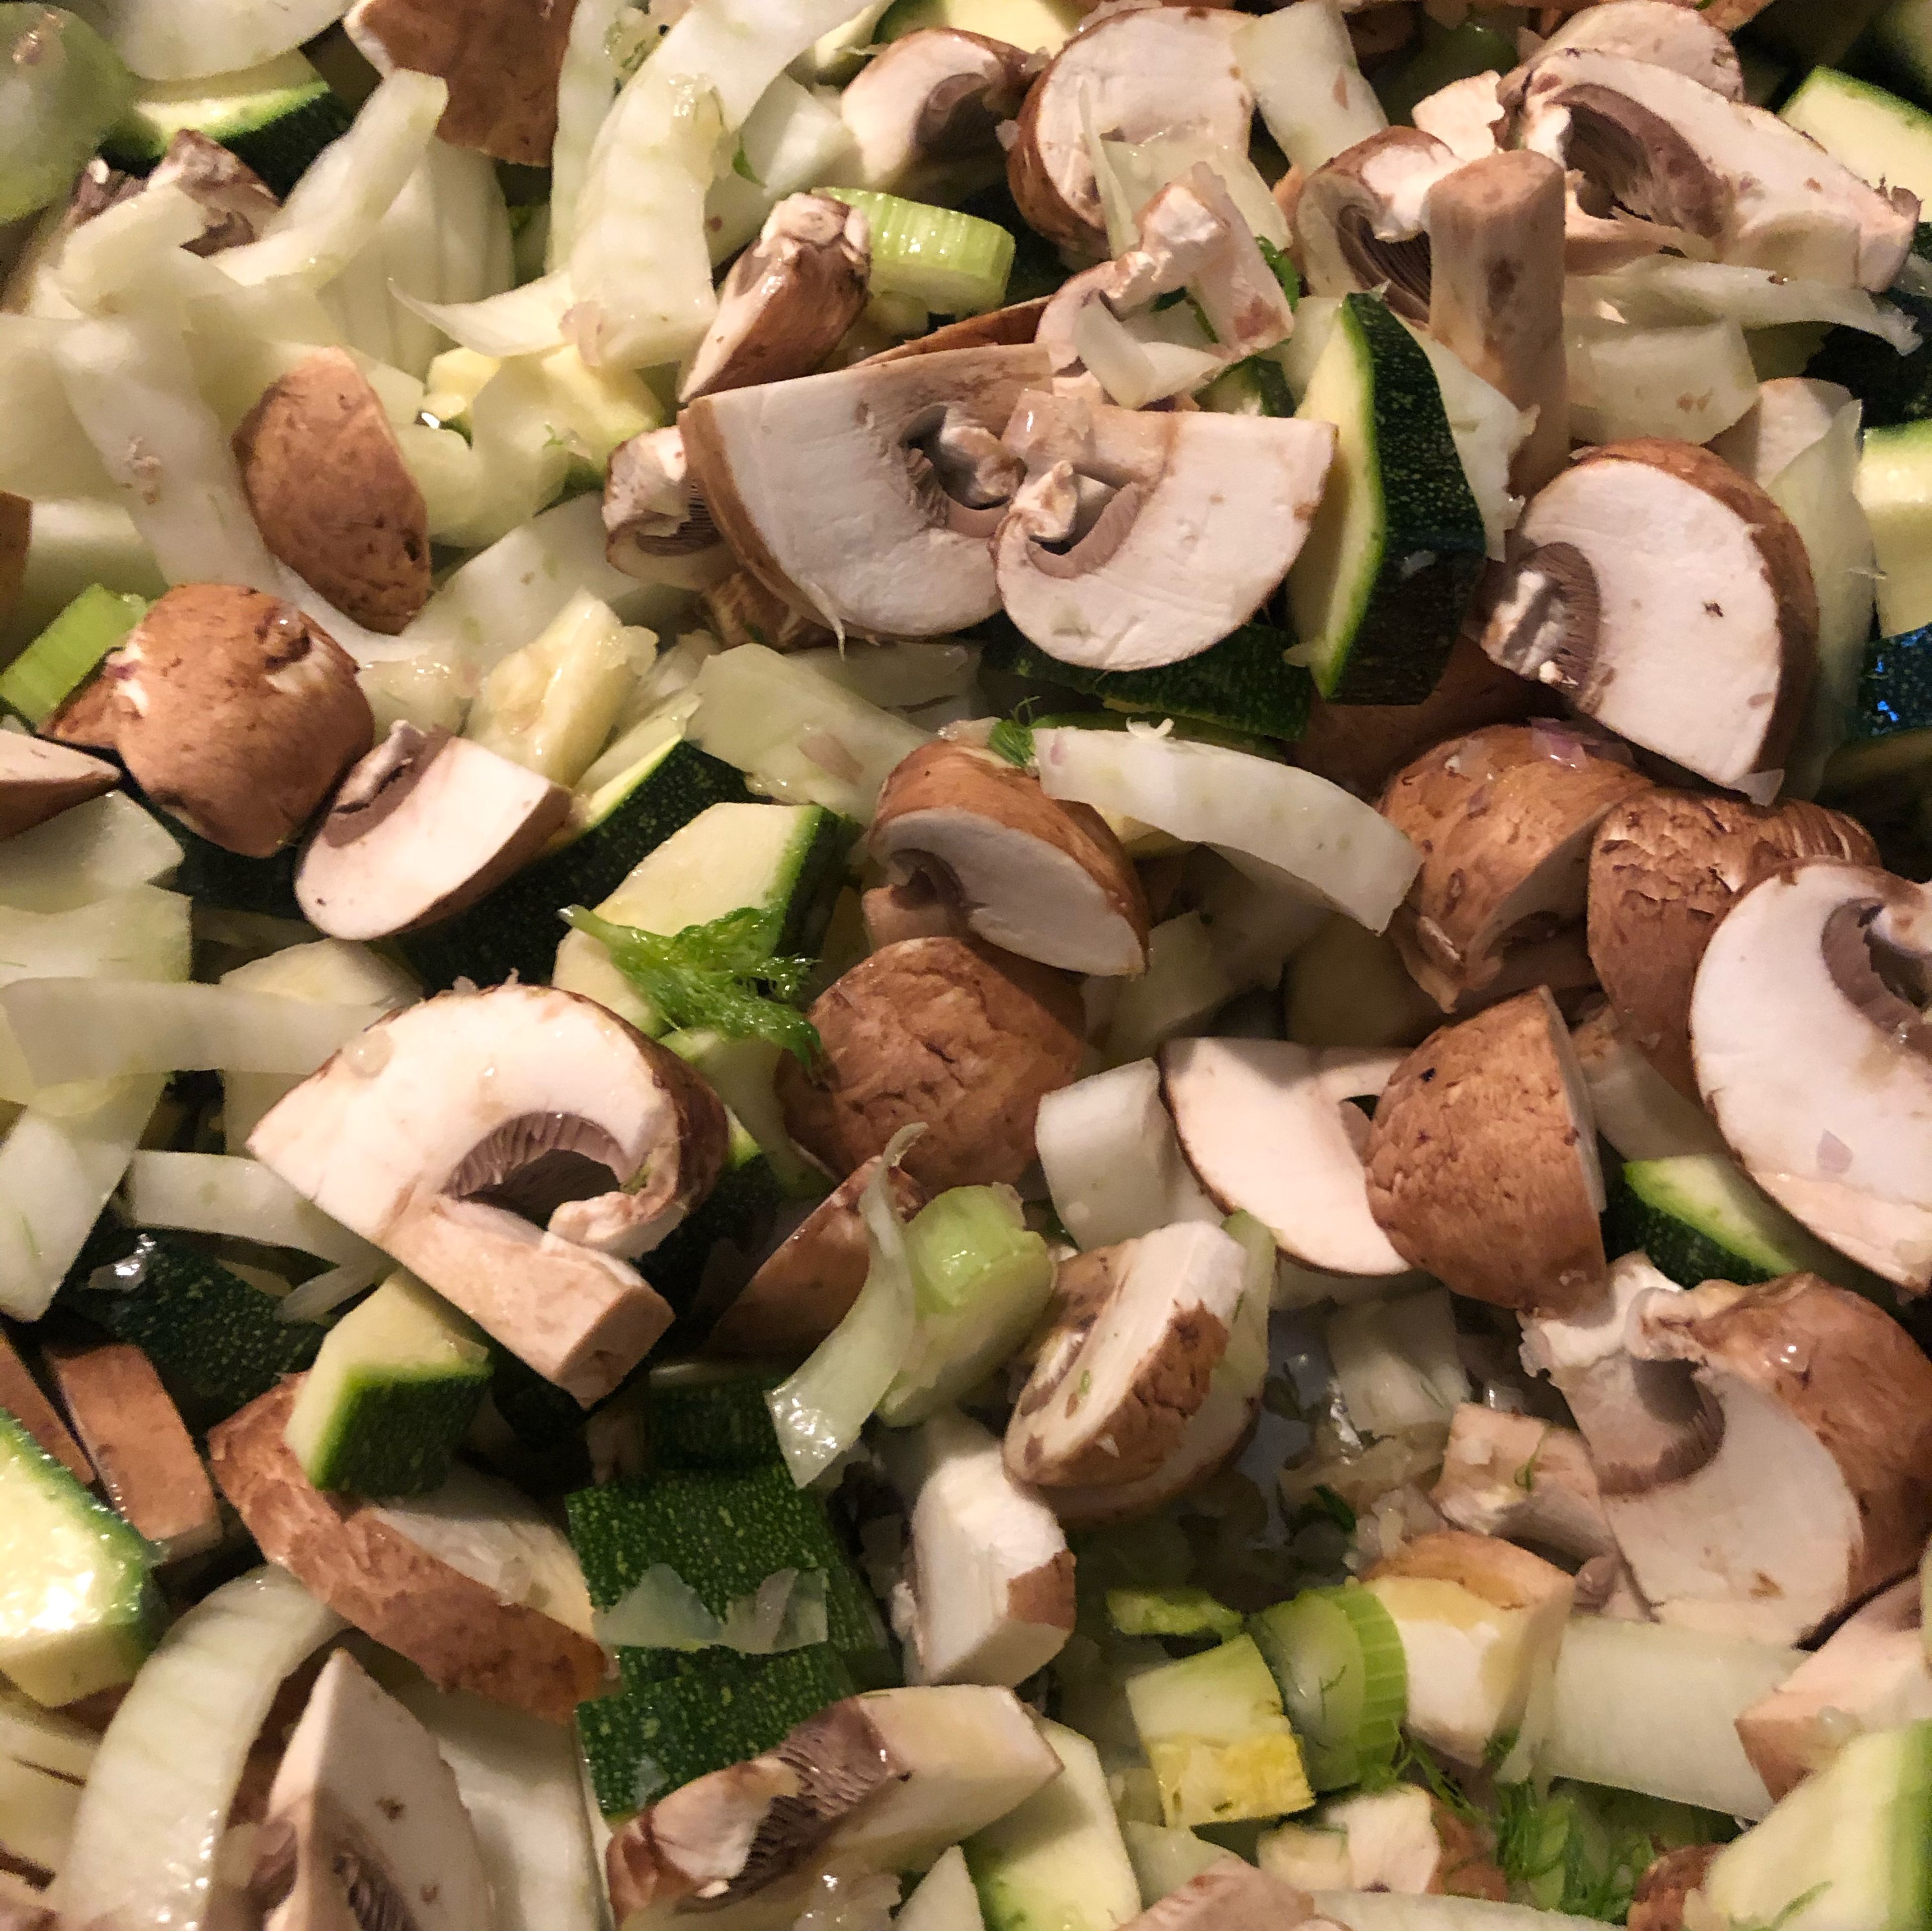 Cut zucchini lengthwise into quarters and remove the seeds in the middle. Then cut into small pieces of approx. 0,5 cm/1/4 in. Halve mushrooms and cut into pieces as well. Cut the fennel into thin strips. Finely chop the shallots and mince garlic.